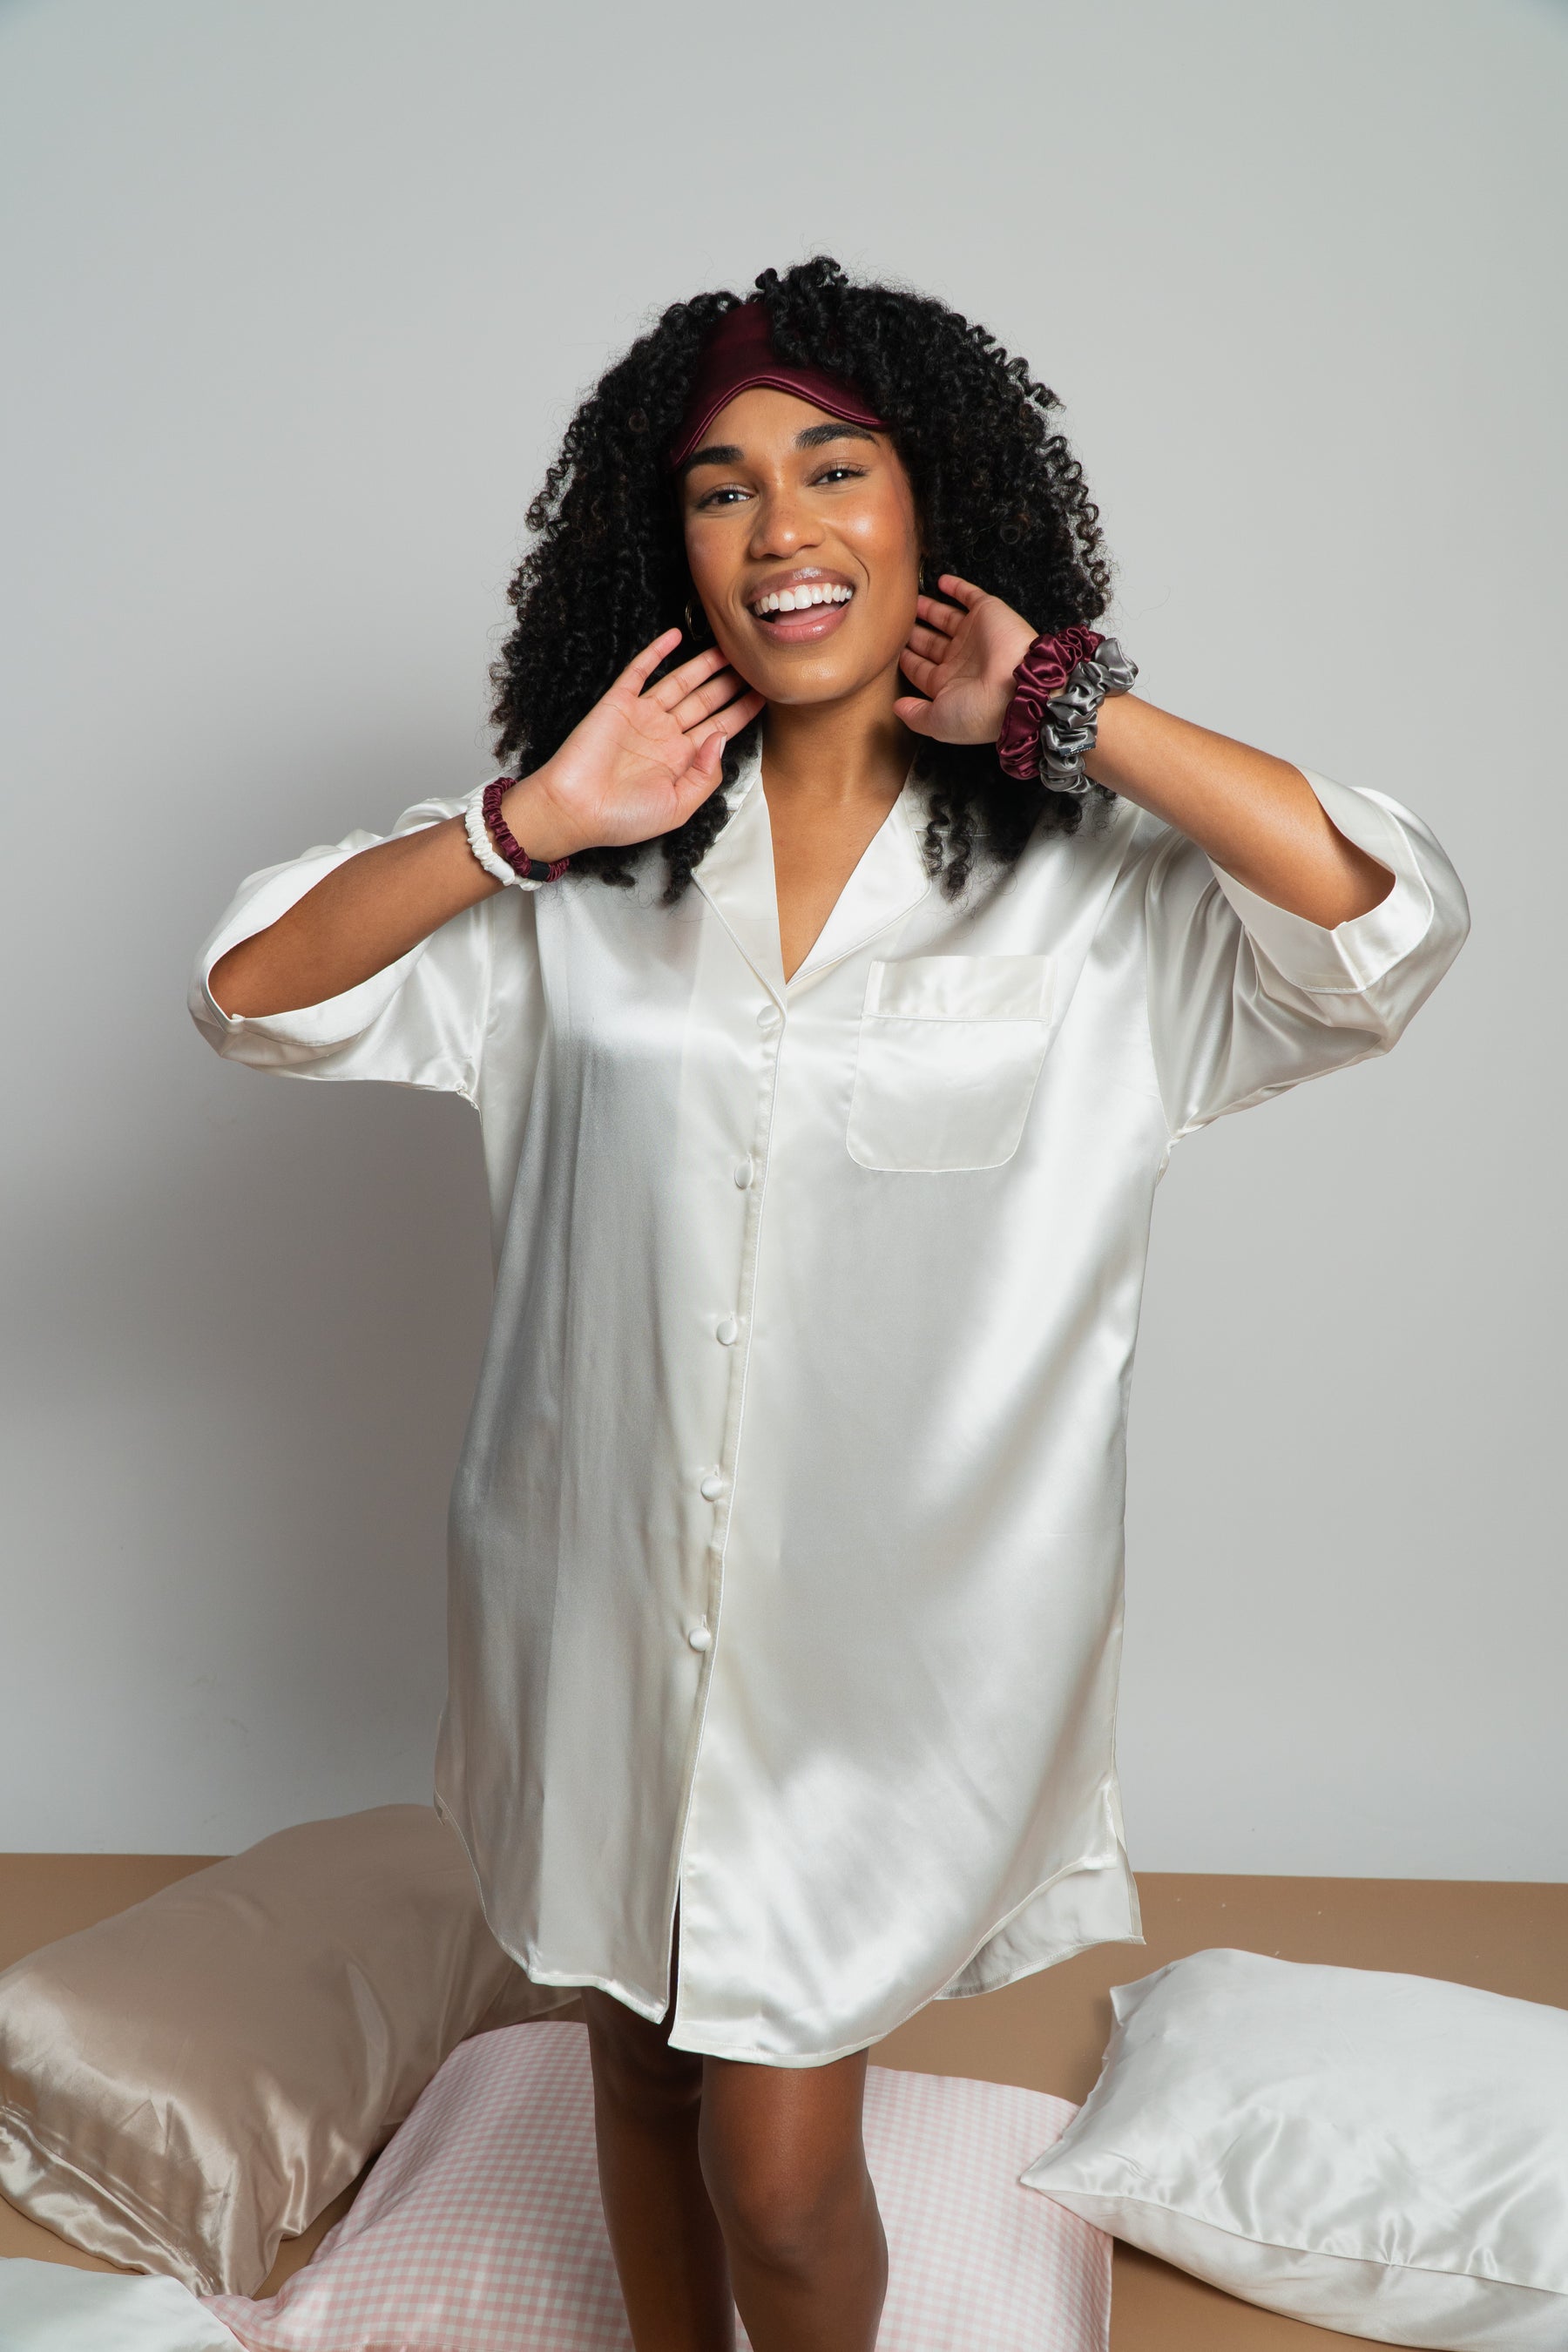 Night shirt Mother's Day Sale  Was $159 Now $105 limited quantities, get yours before they are gone!